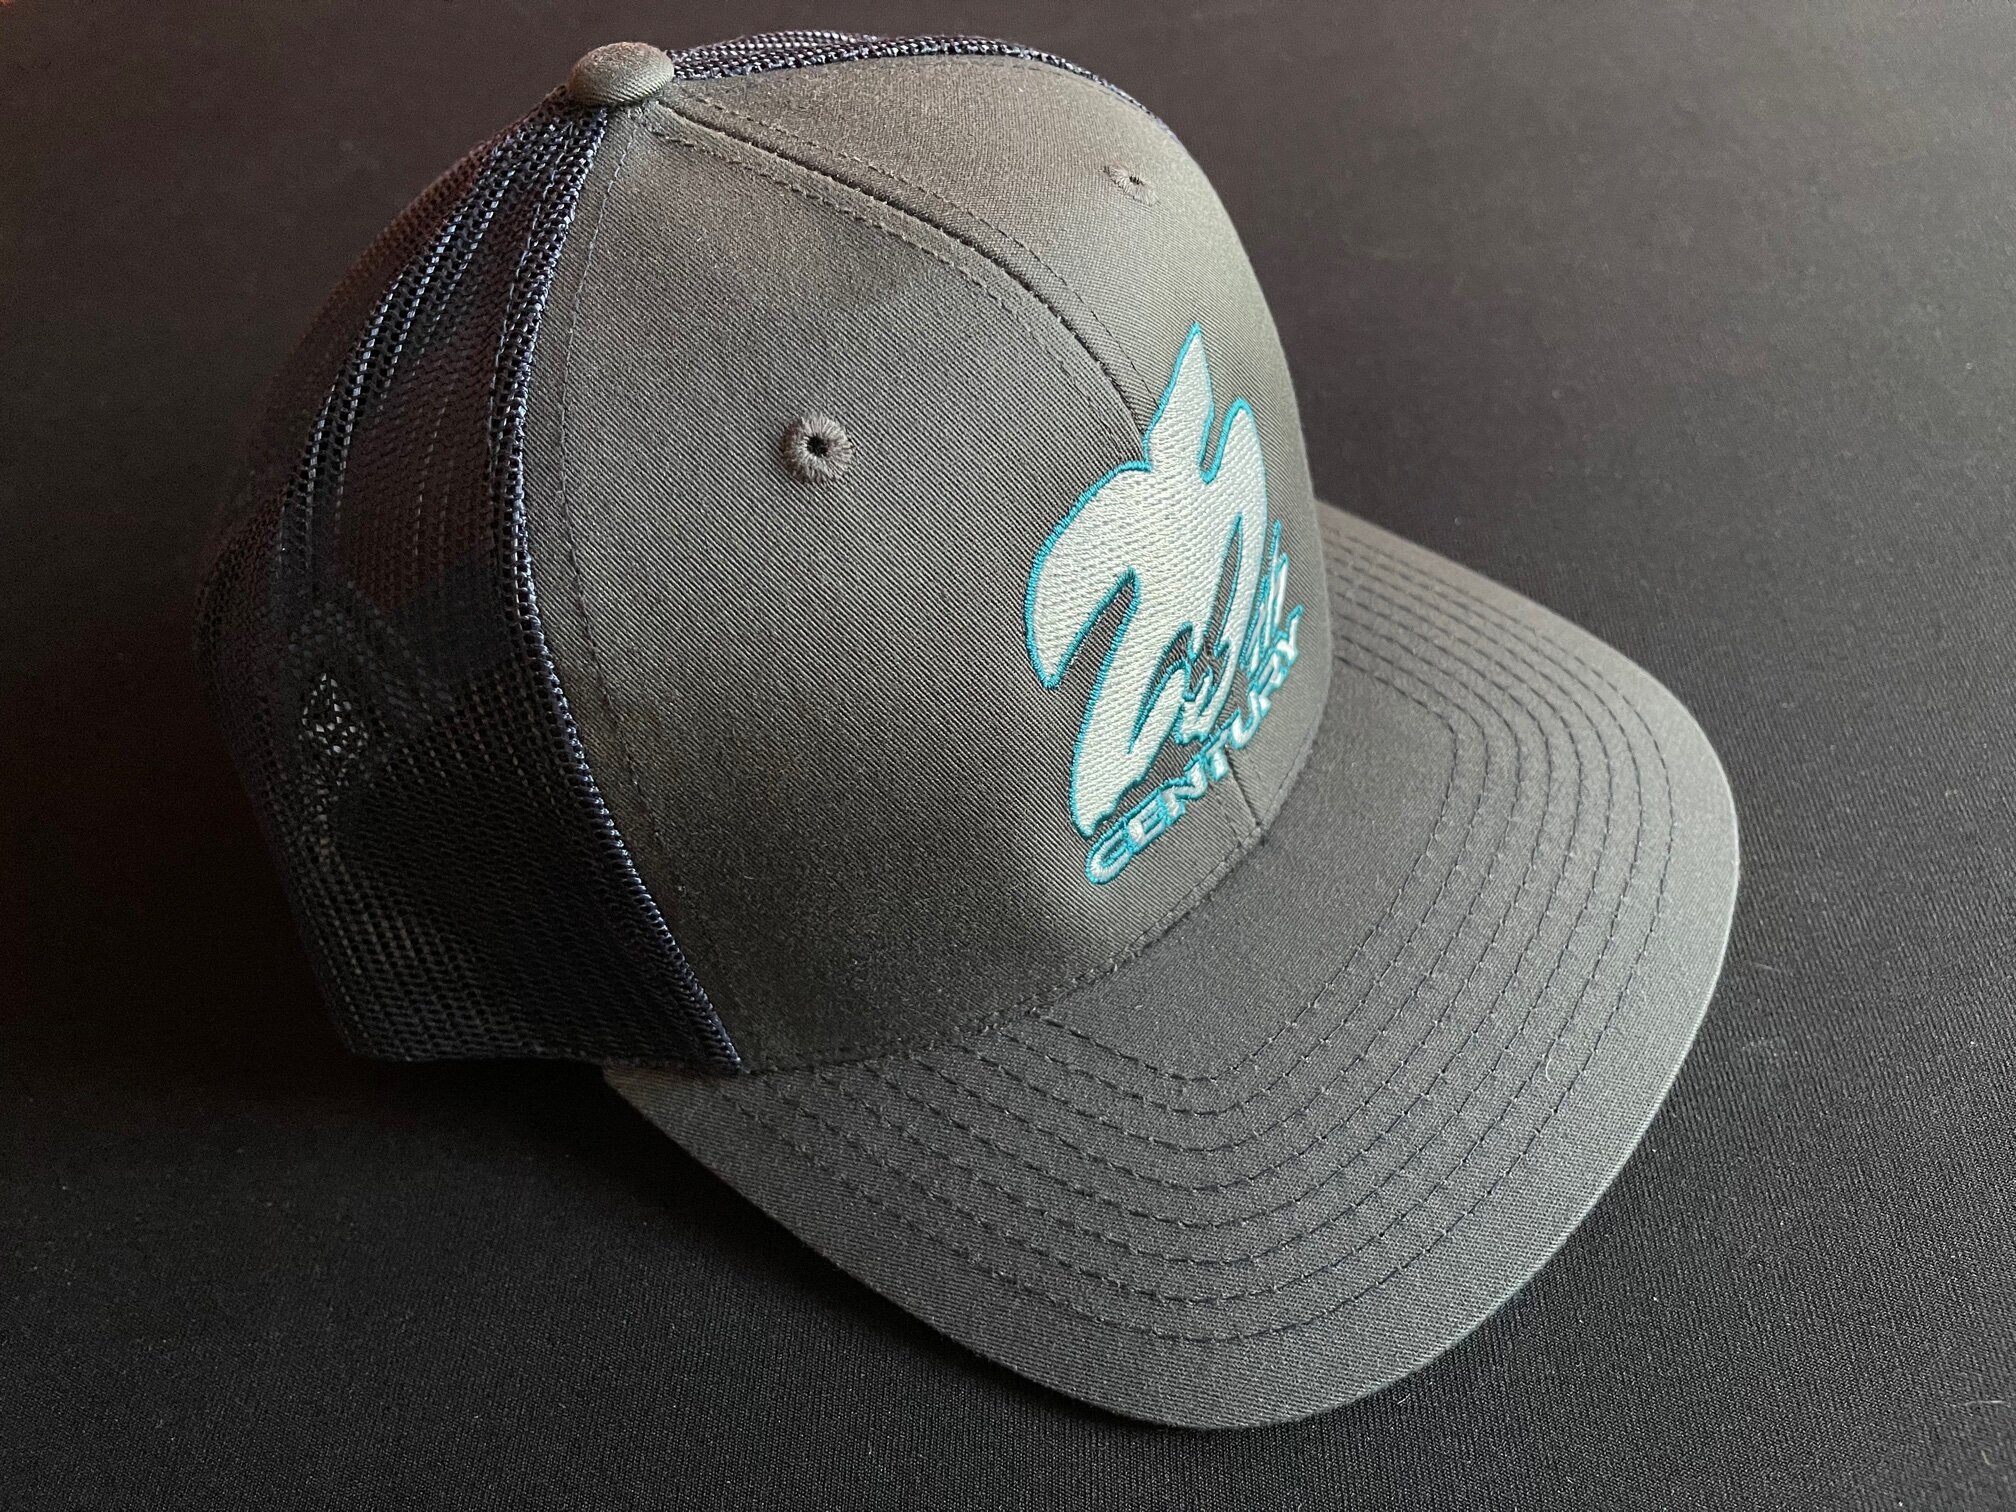 25th Century Games 25th — Hats Embroidered Century